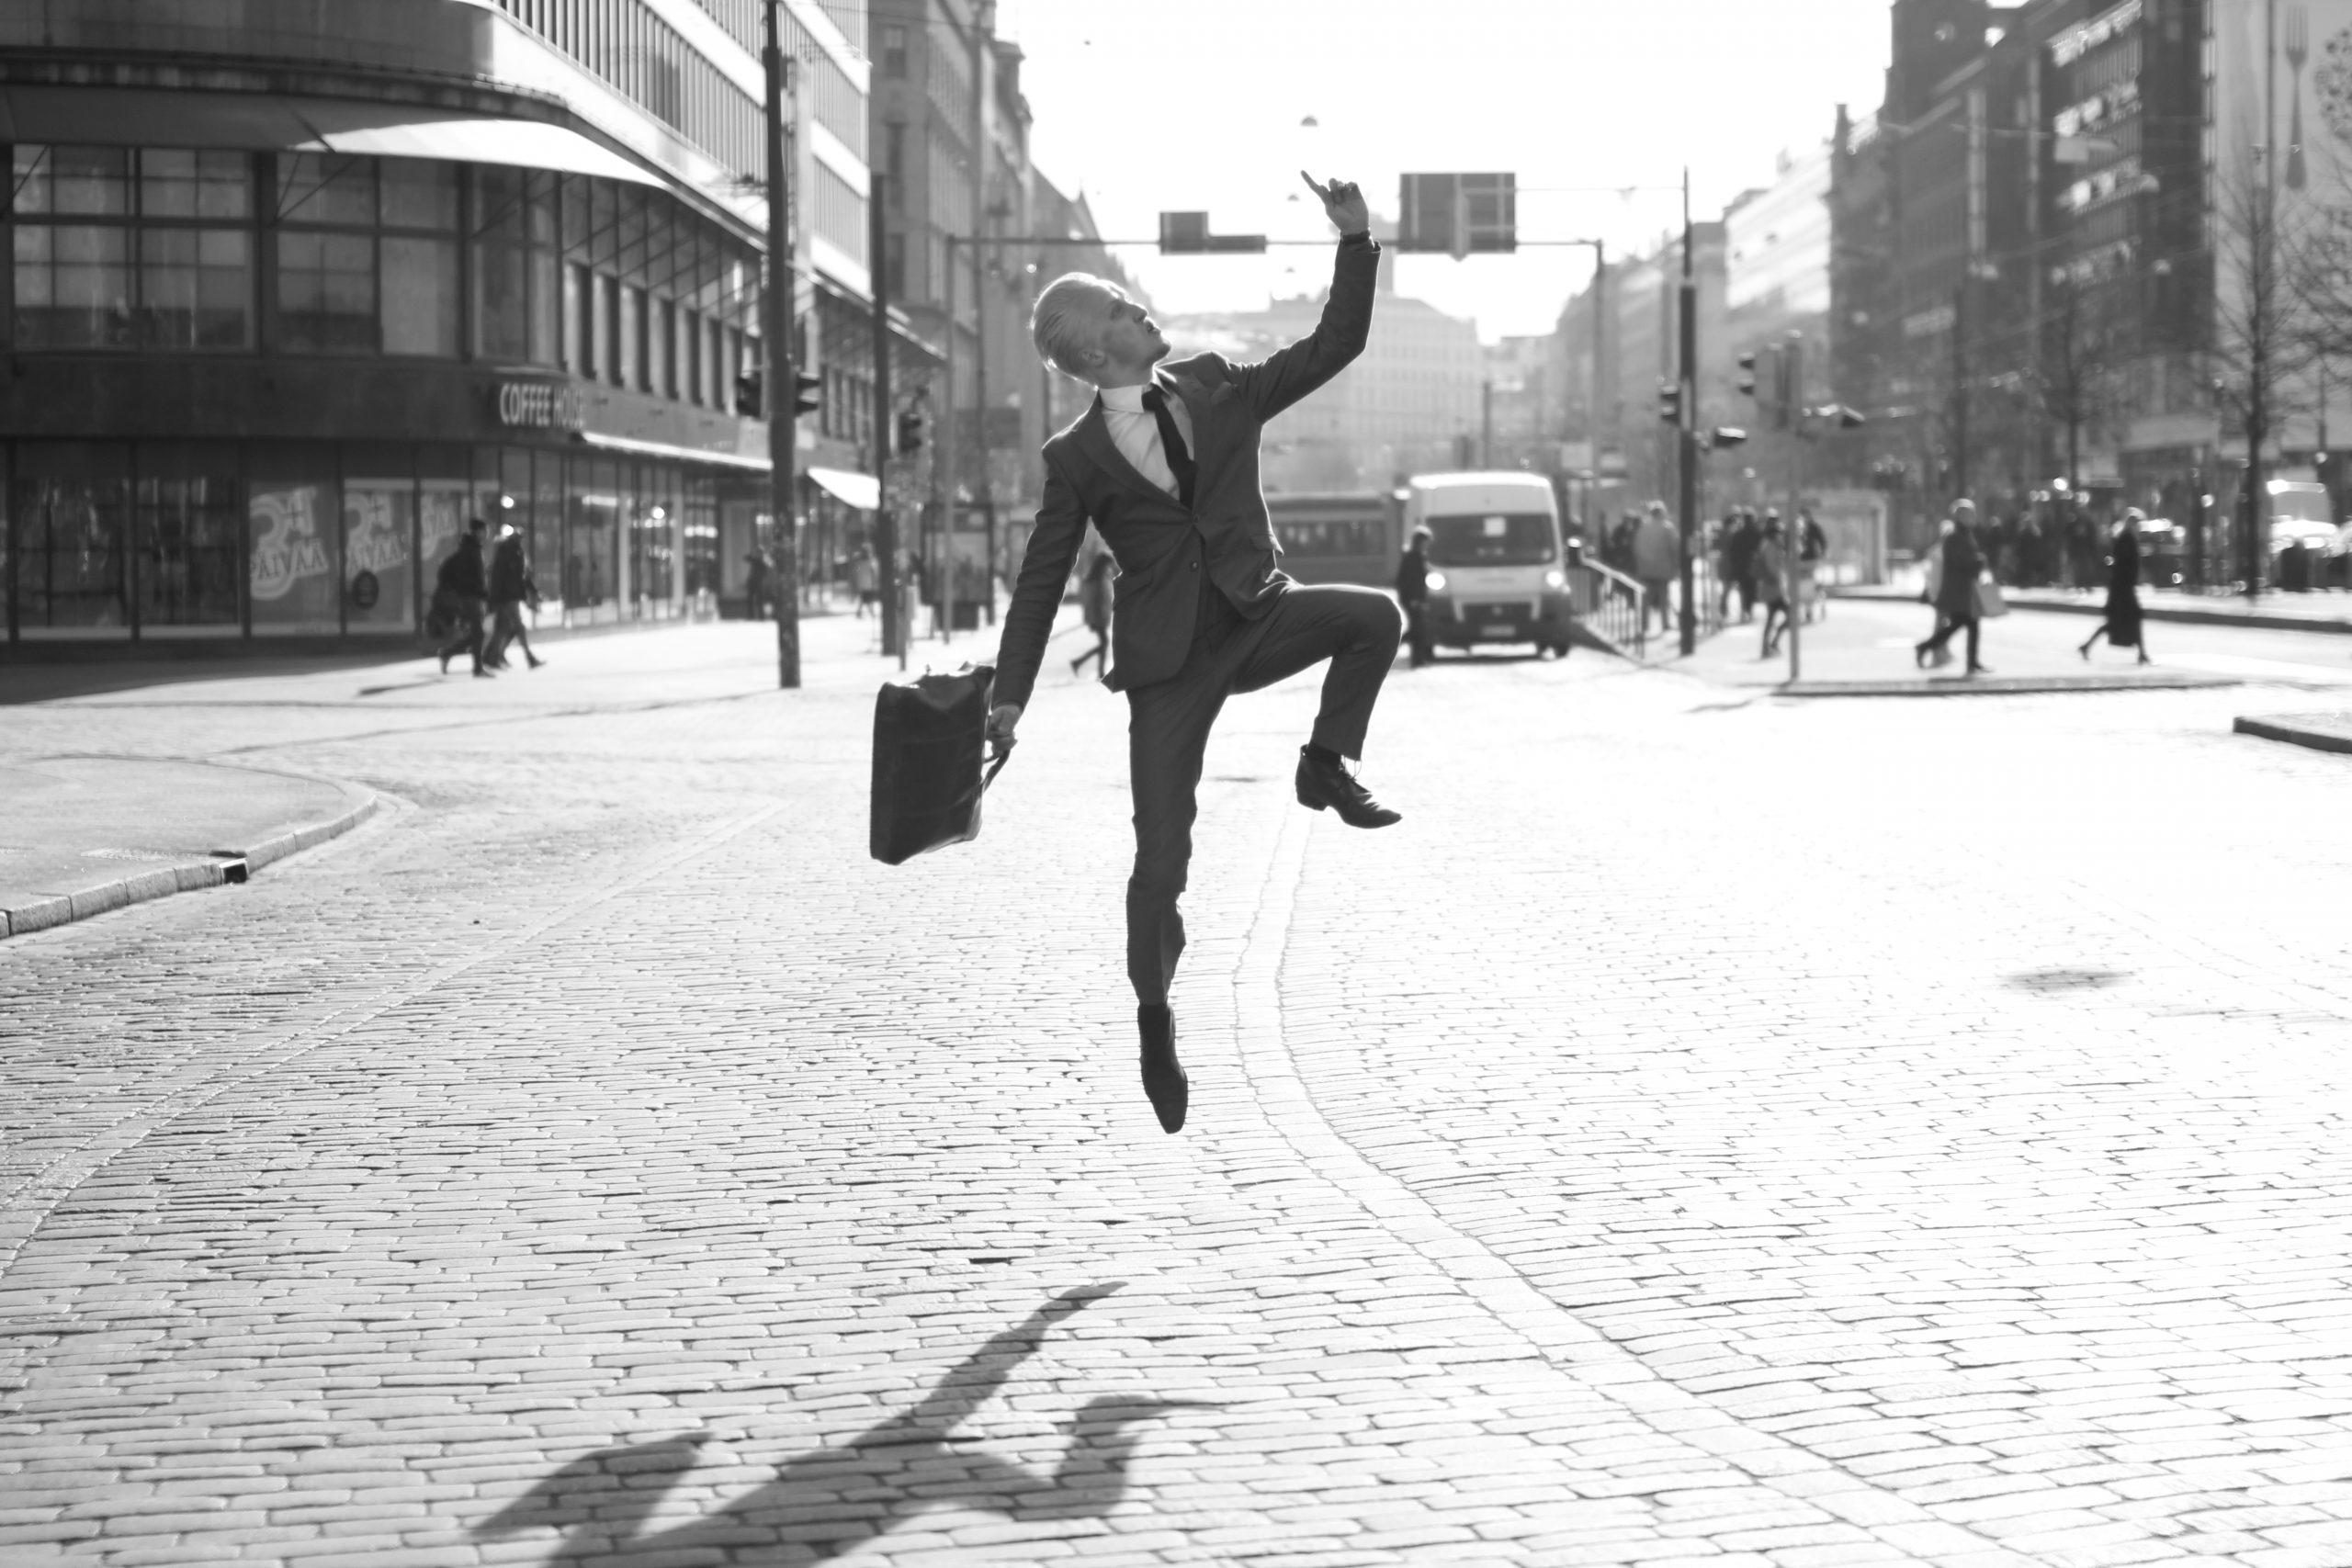 Anders Holm jumping in the street